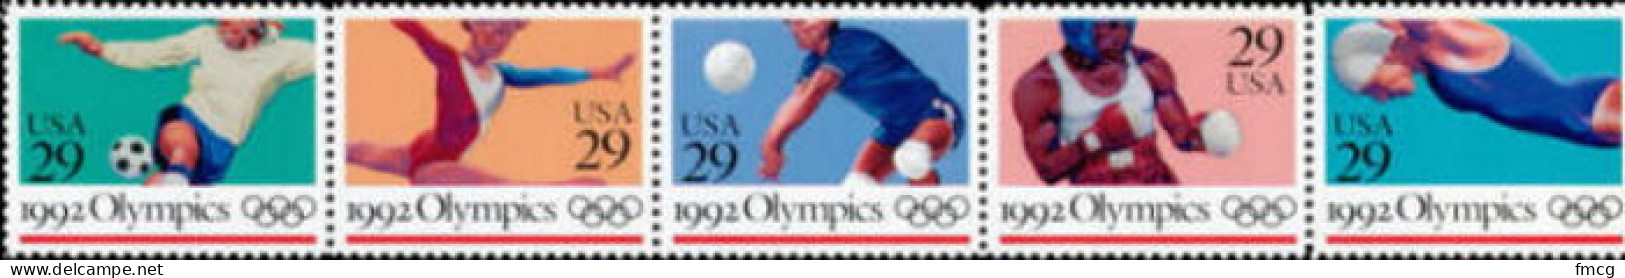 1992 25 Cents Summer Olympics, Strip Of 5, MNH - Unused Stamps